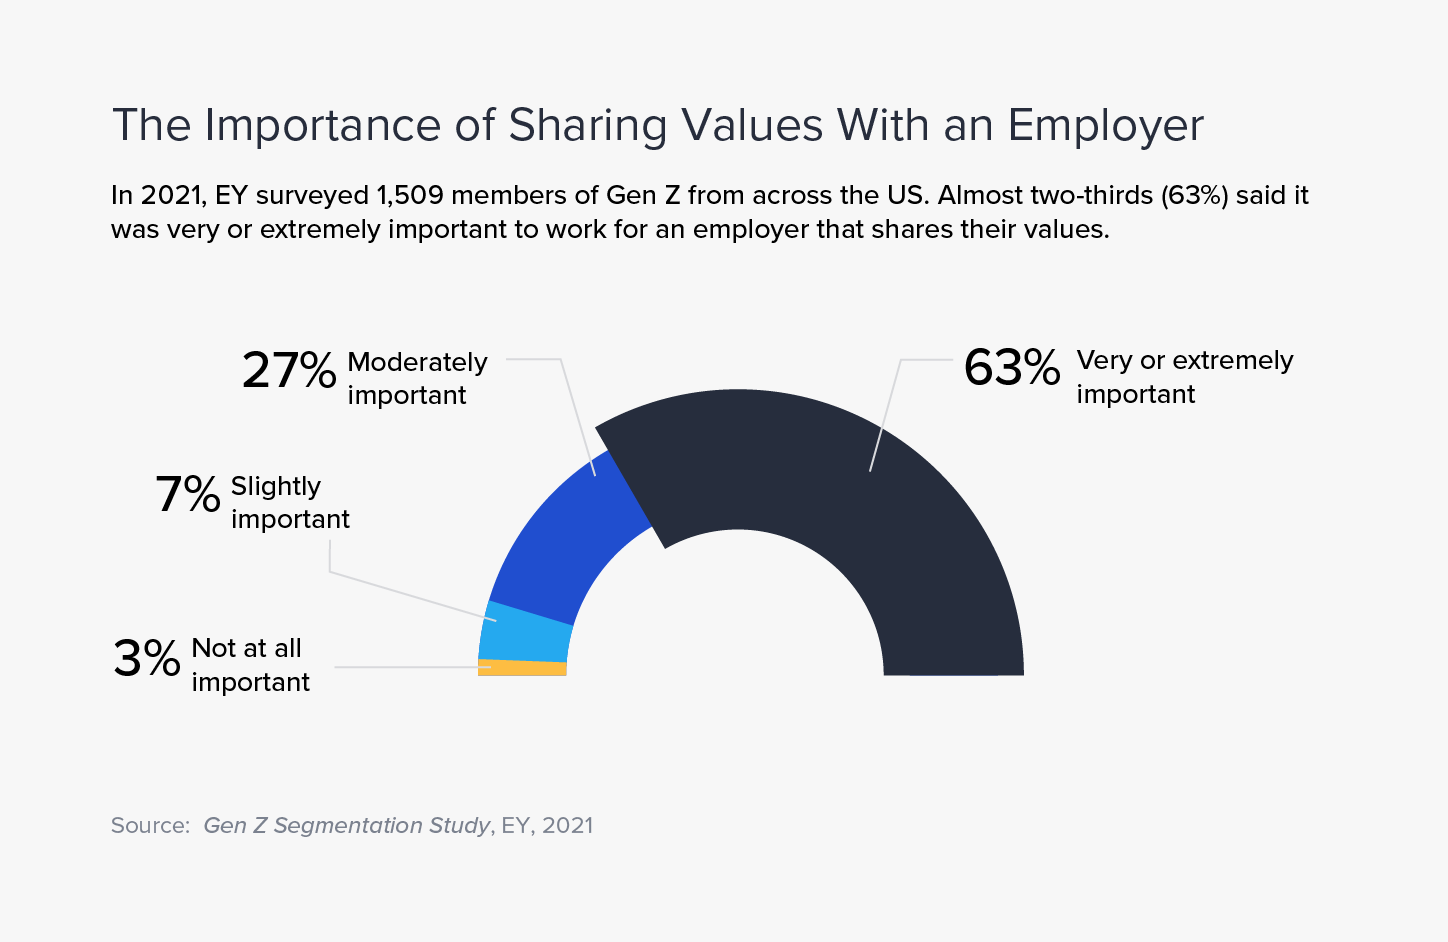 A 2021 EY survey found that 63% of Gen Zers in the US believed it was very or extremely important to work for an employer that shares their values.